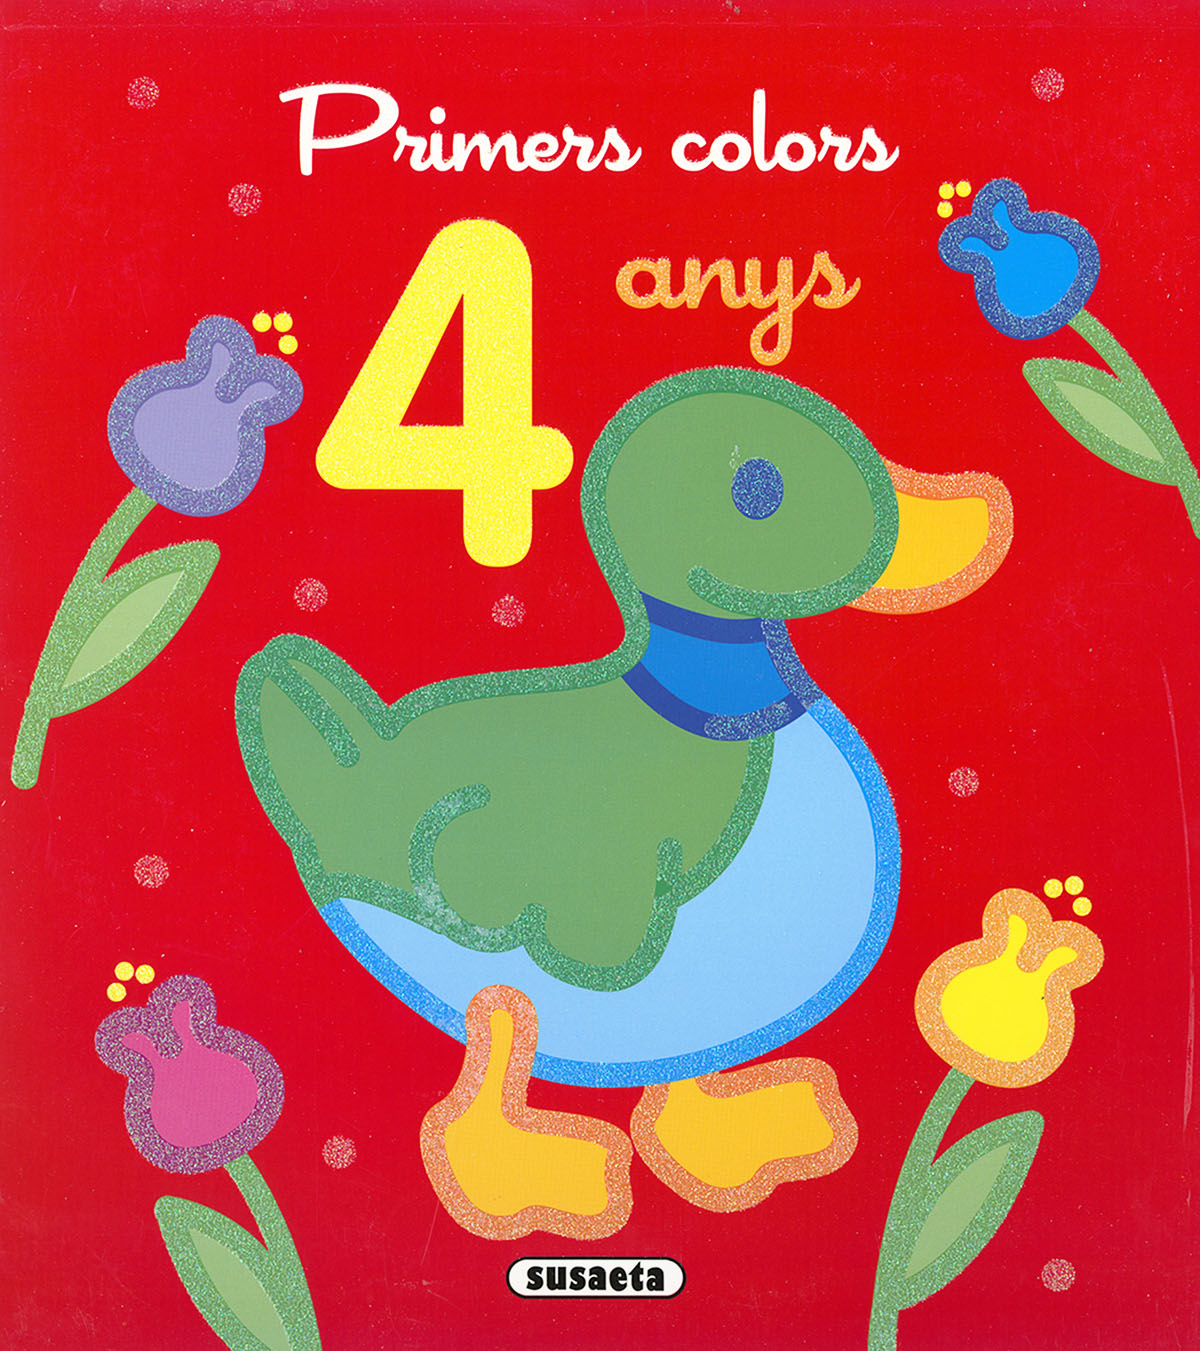 Primers colors 4 anys